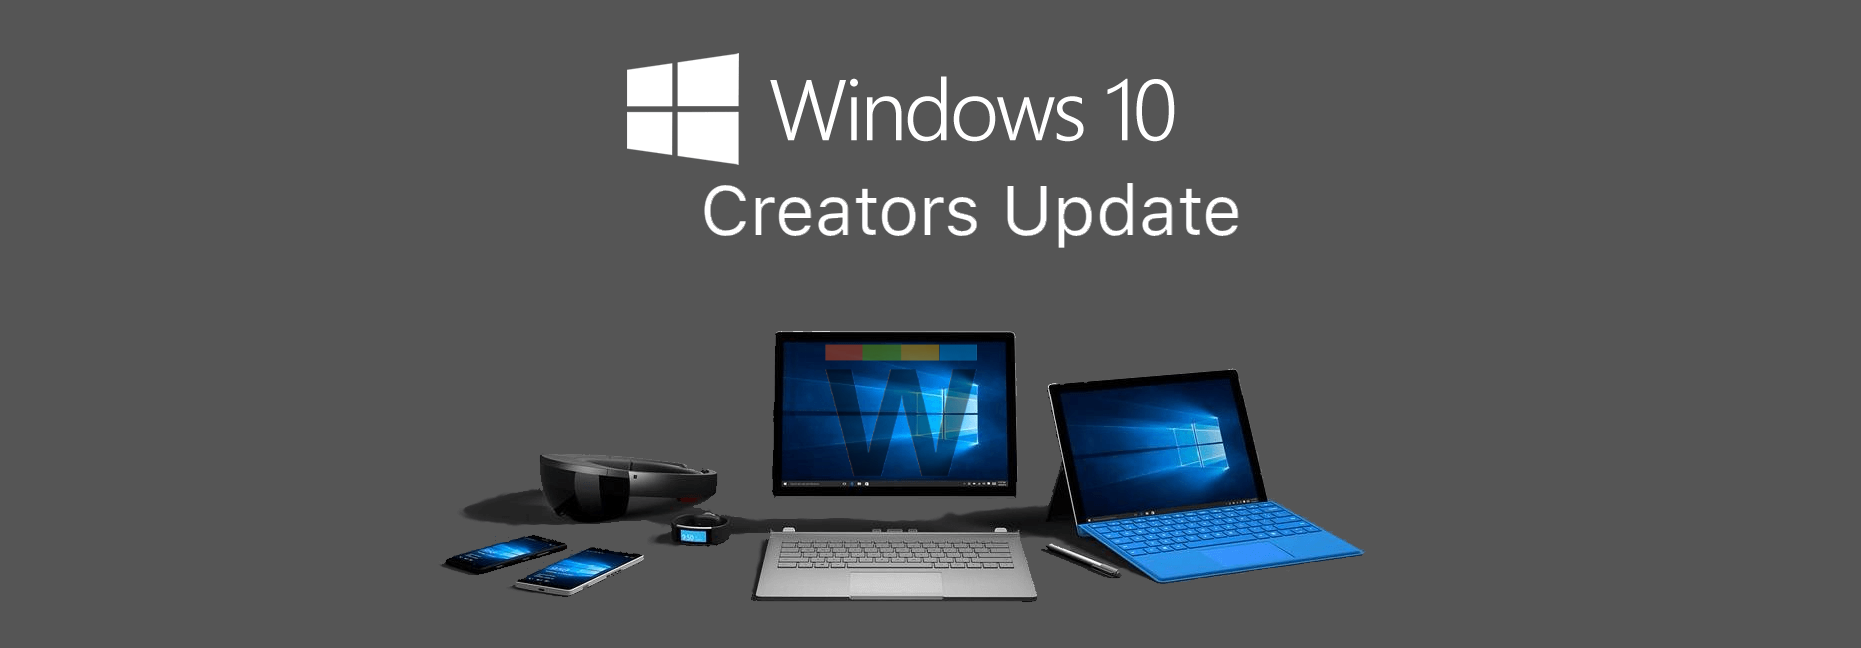 Windows 10 Creators Update supported Devices